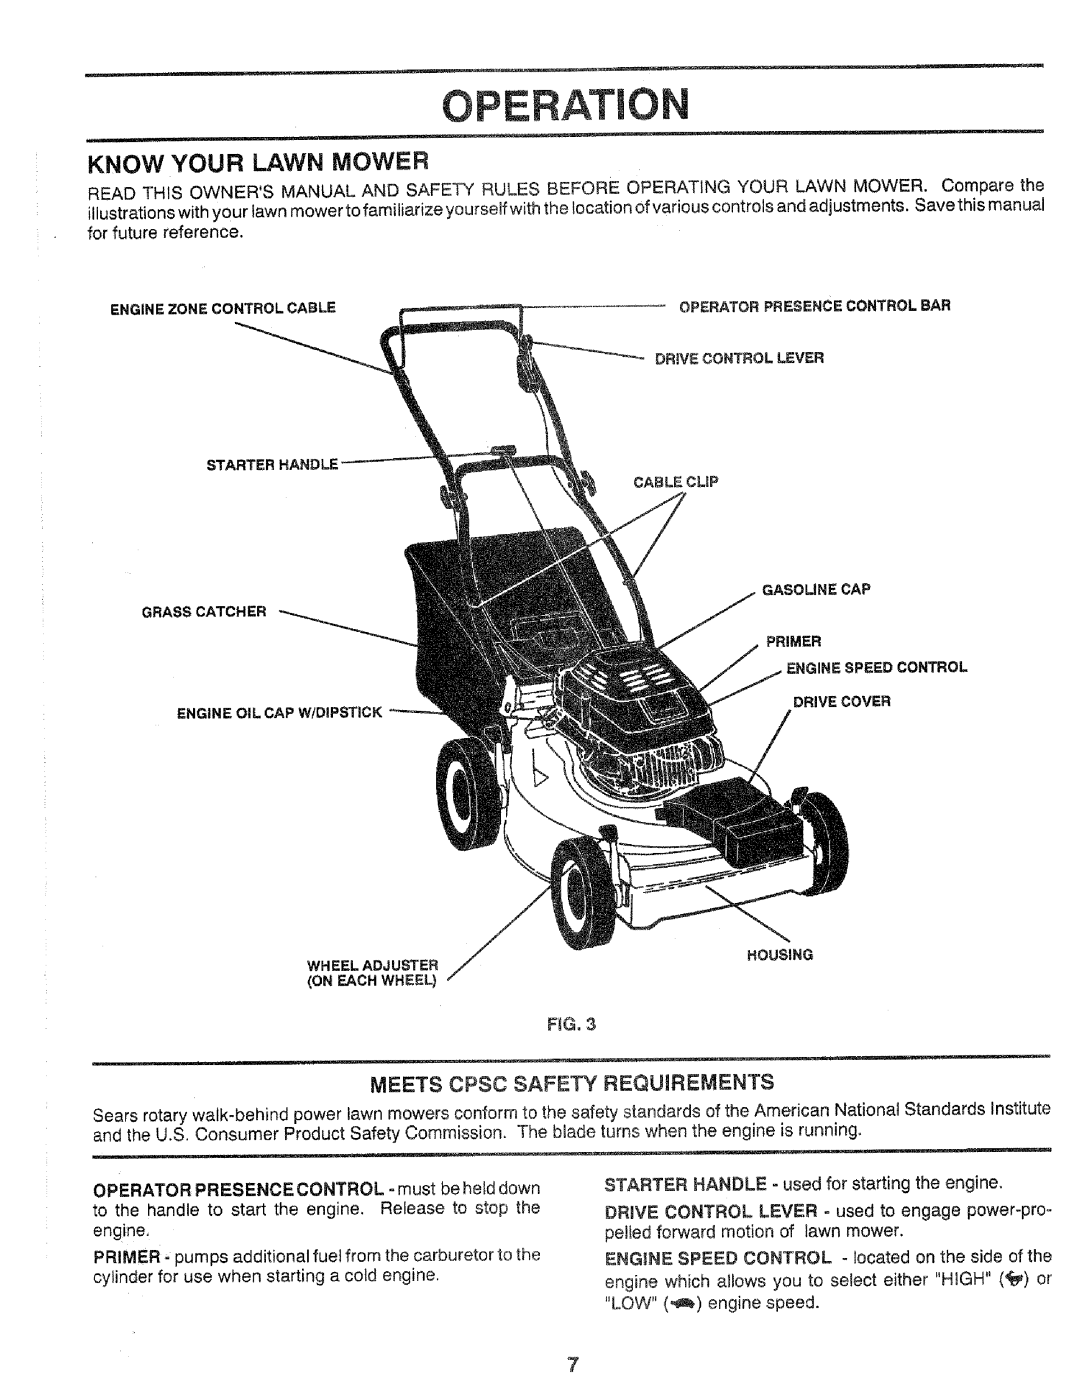 Craftsman 917.37248 owner manual Operation, Know Your Lawn Mower, Meets Cpsc Safety Requirements 